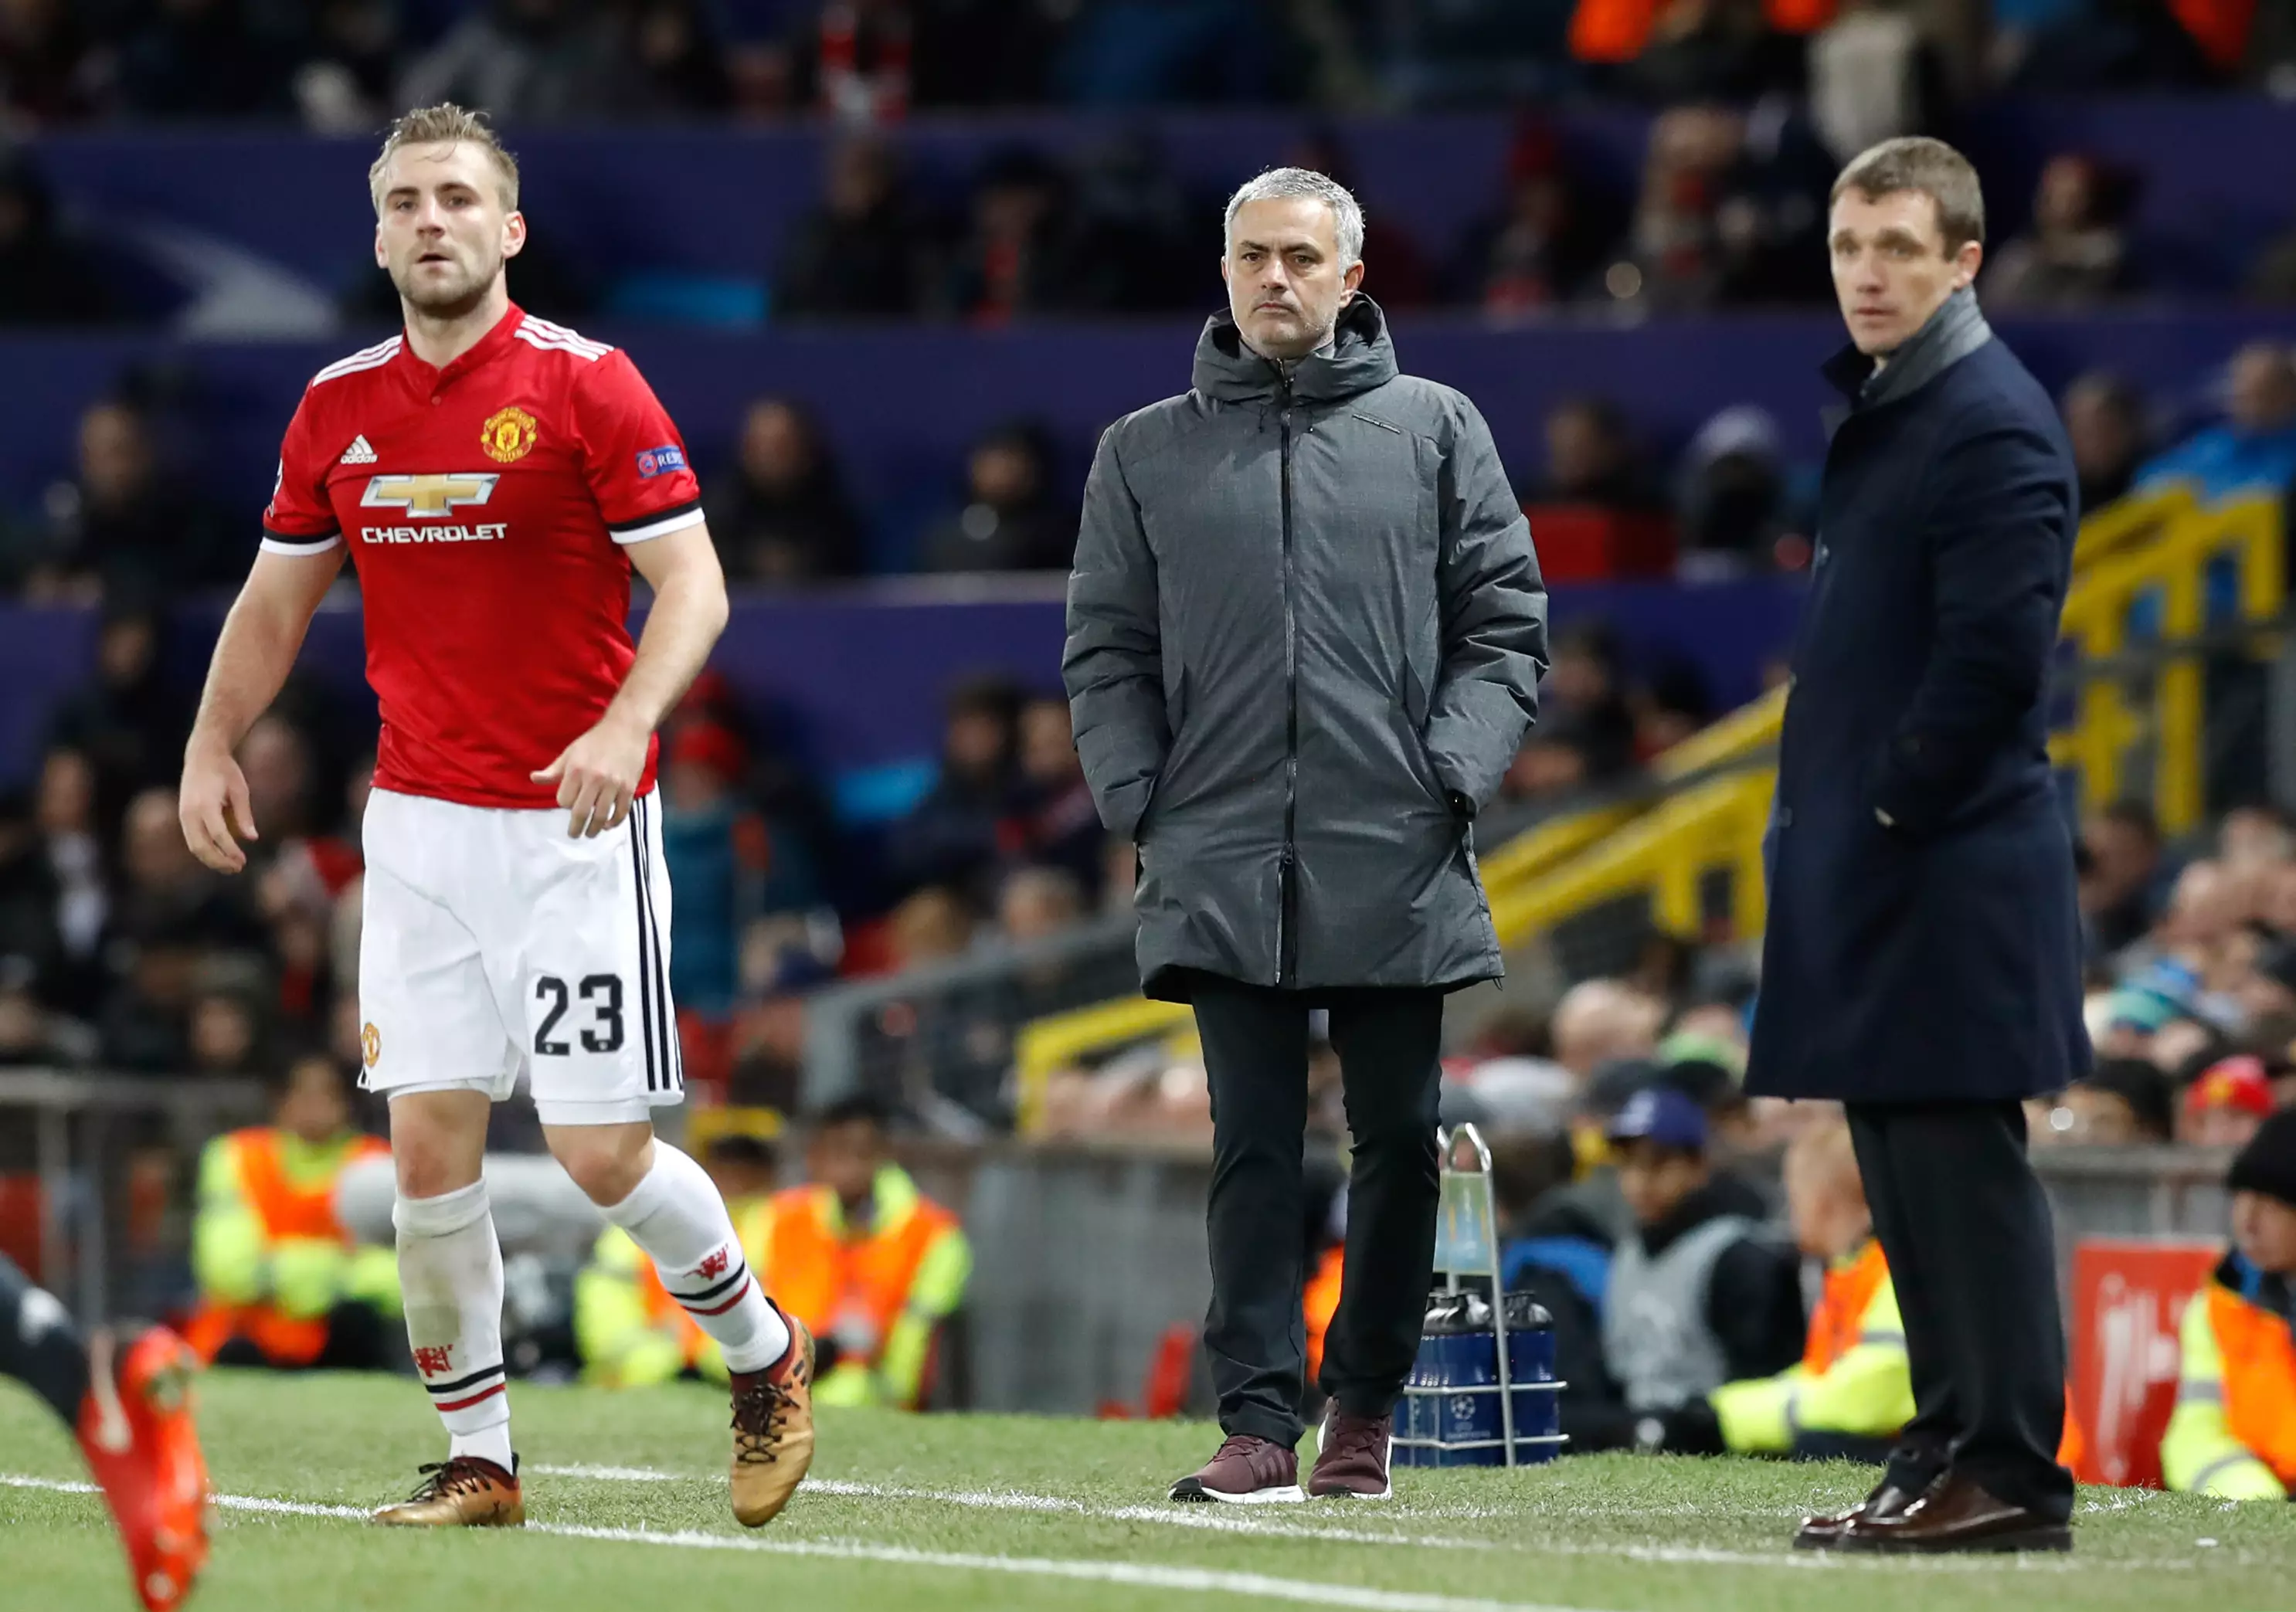 Mourinho and Shaw's relationship has been fraught. Image: PA Images